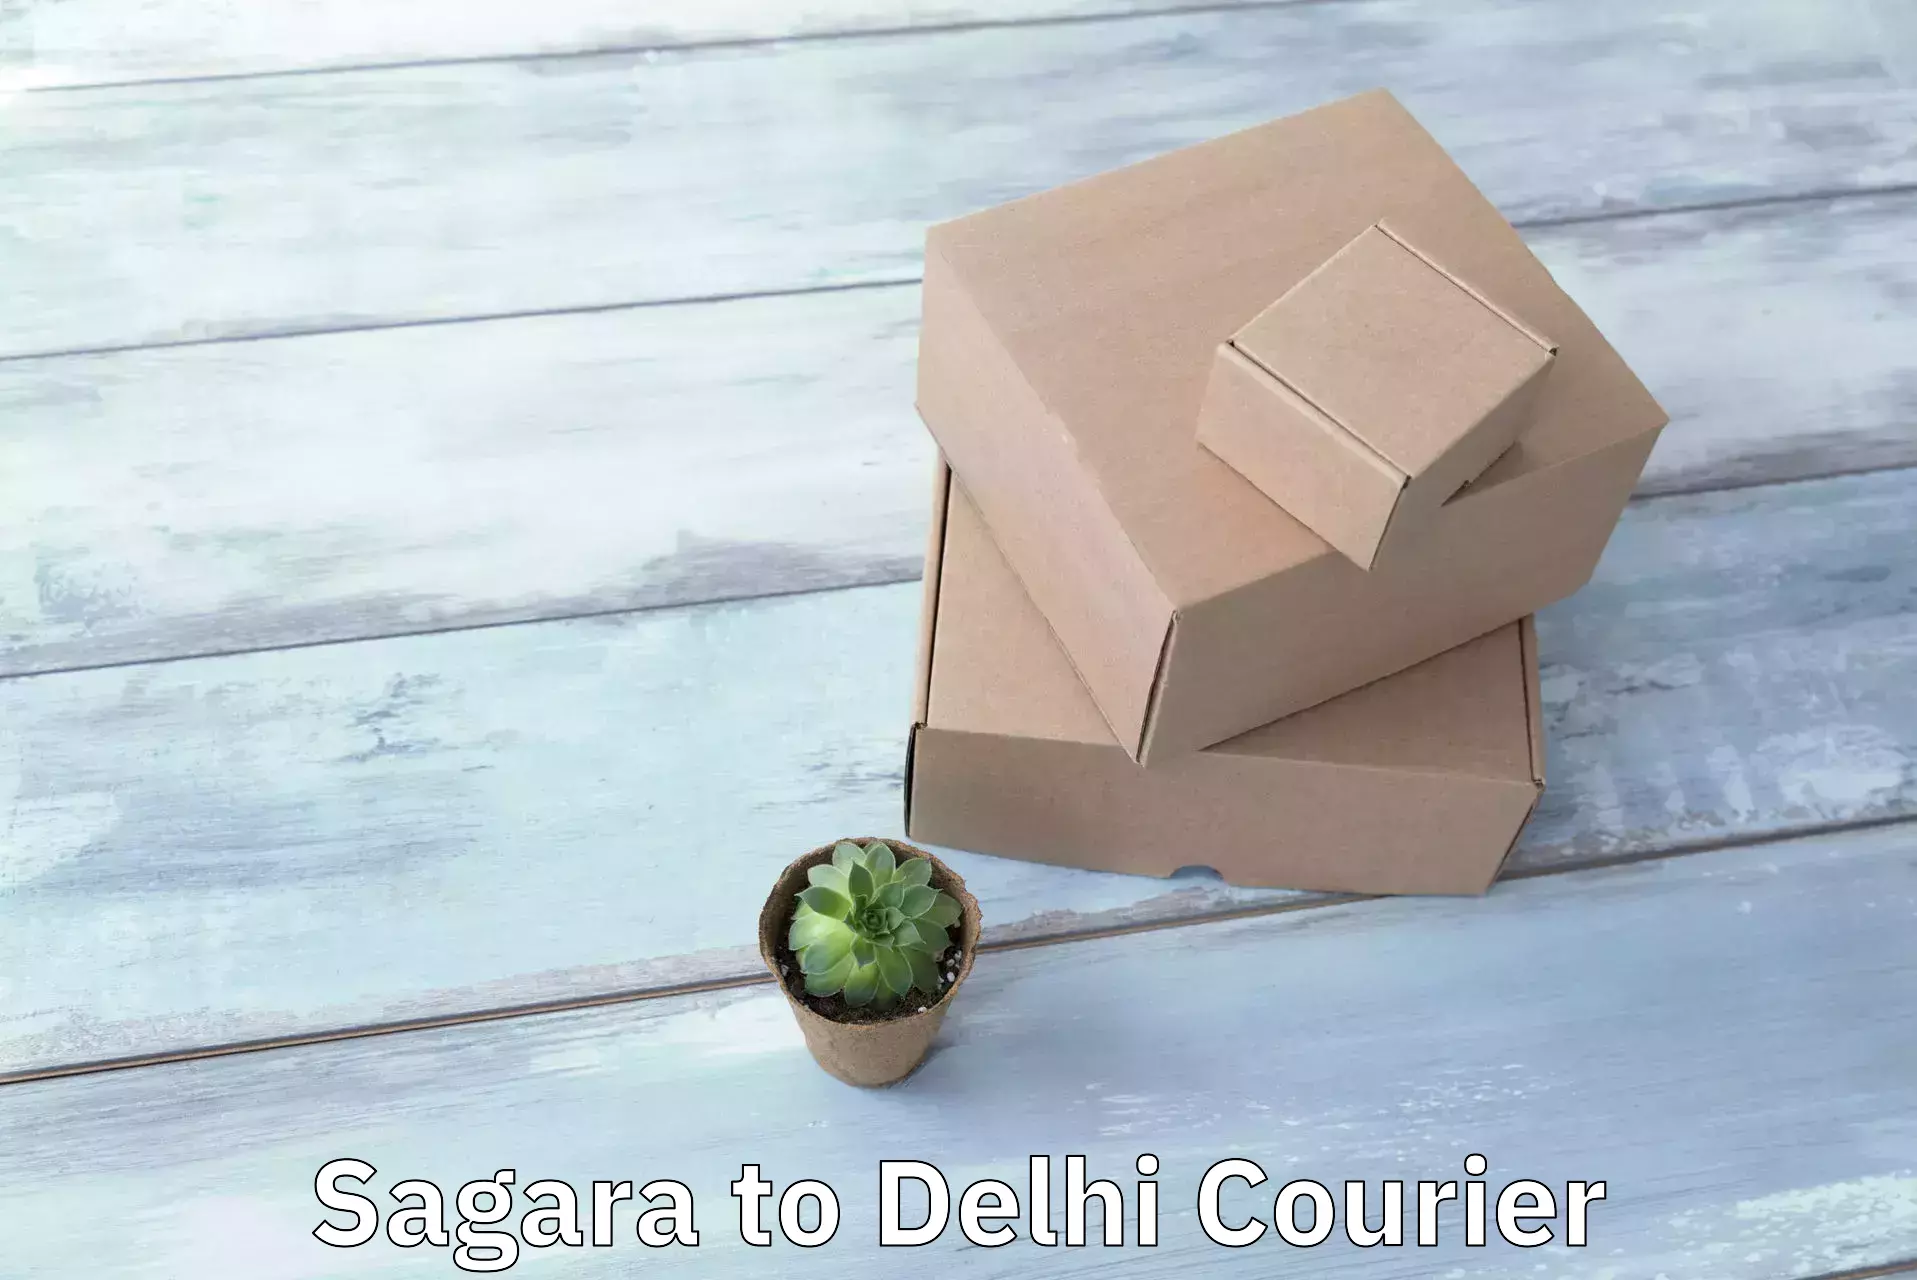 State-of-the-art courier technology Sagara to Delhi